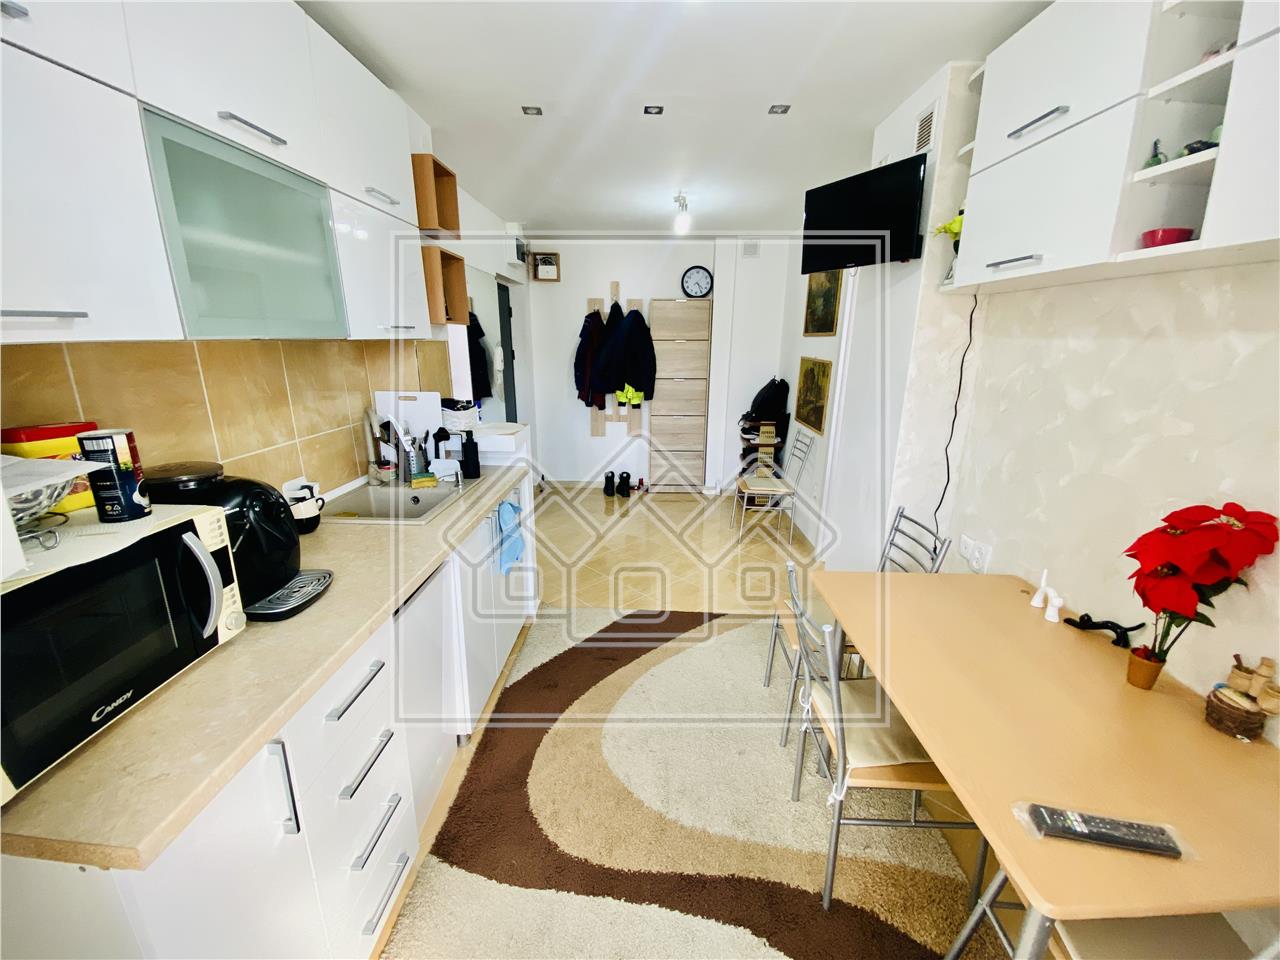 Apartment for sale in Sibiu - 2 rooms, balcony and cellar - Siretului